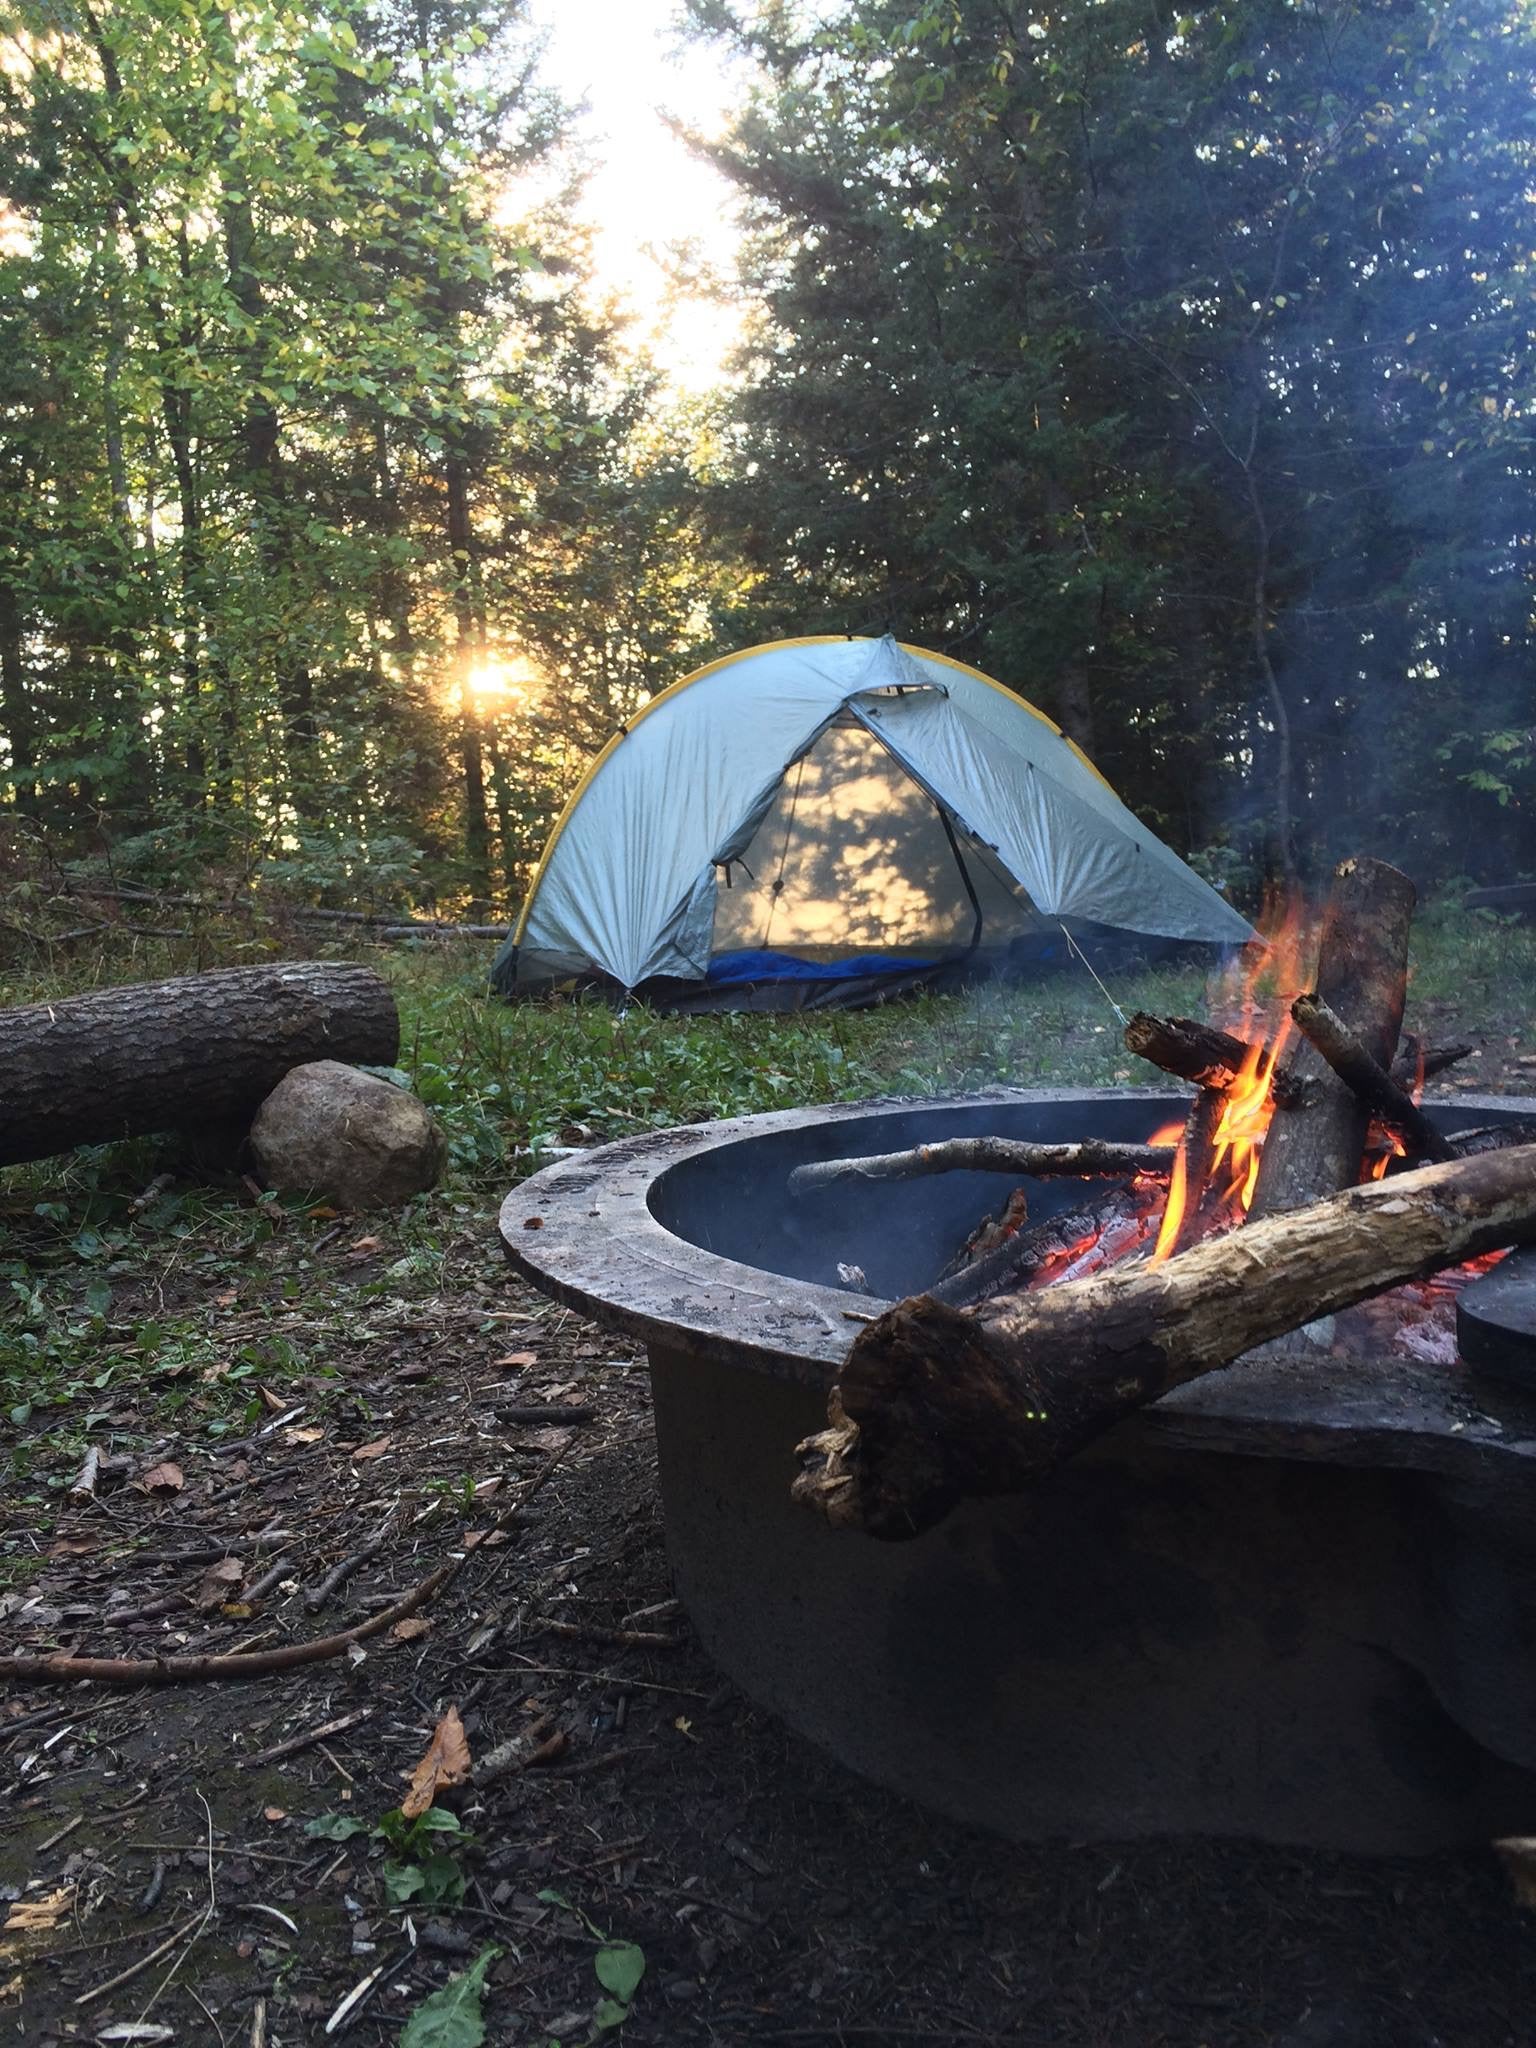 Camper submitted image from Chequamegon National Forest Perch Lake Campground - 3